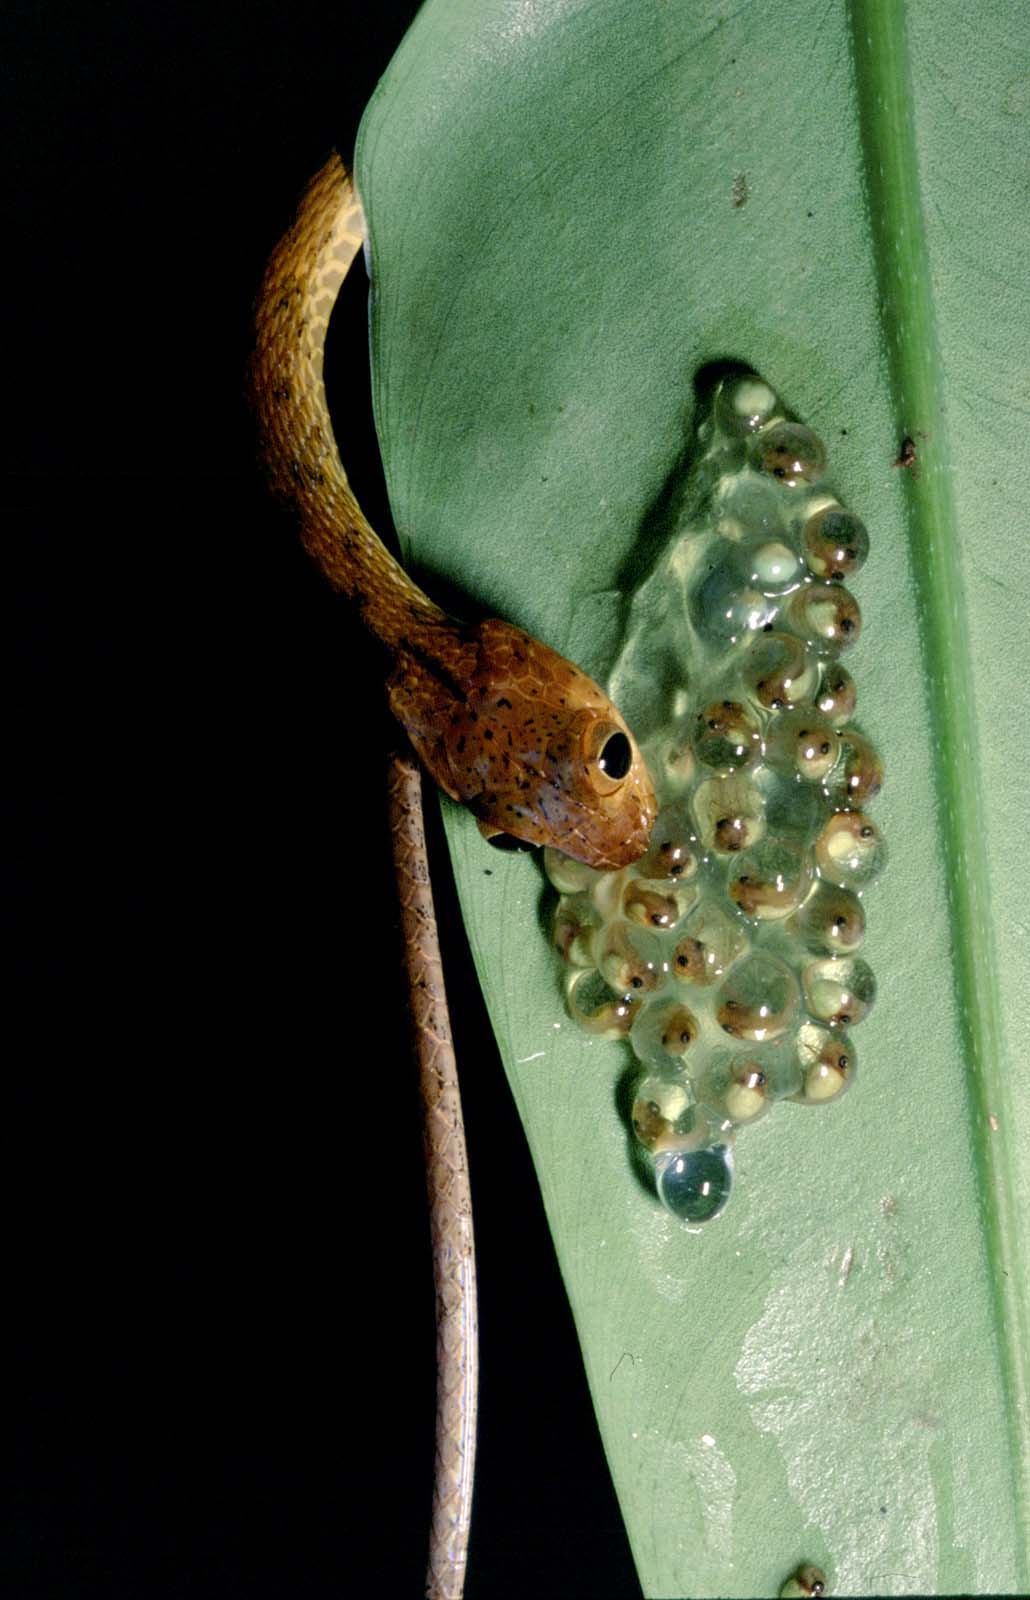 Frogs and their eggs are an important source of nutrition for many snakes. This tiny blunt-headed tree snake (Imantodes) snags a meal from of frog eggs in the Panamanian forest. Photo Credit: Karen Warkentin